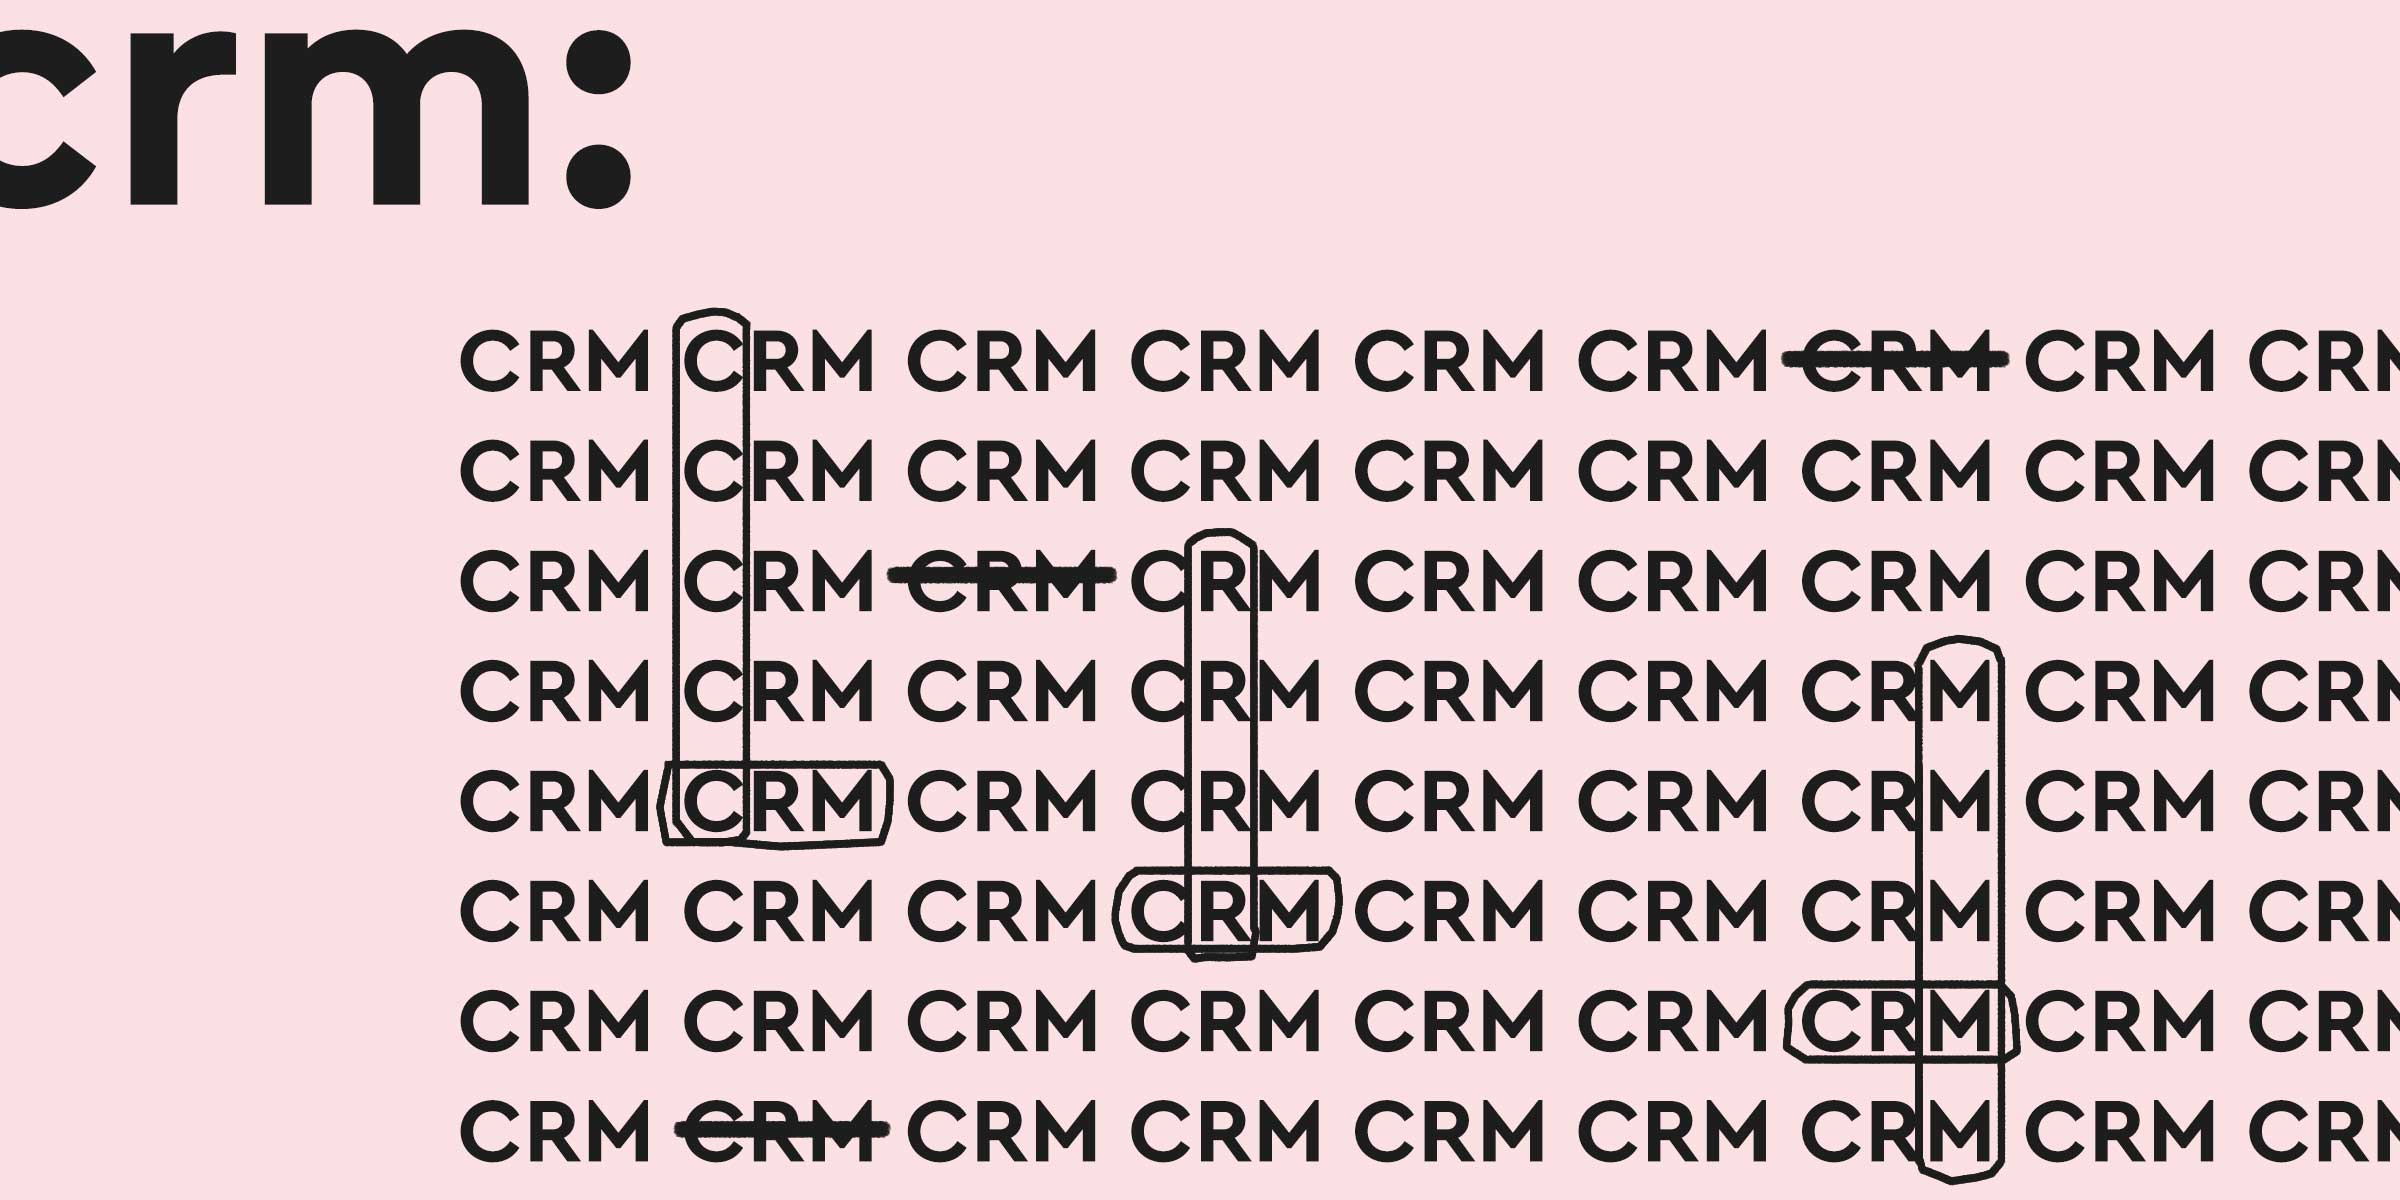 The CRM Contribution Metric: Know What Your CRM Is Worth